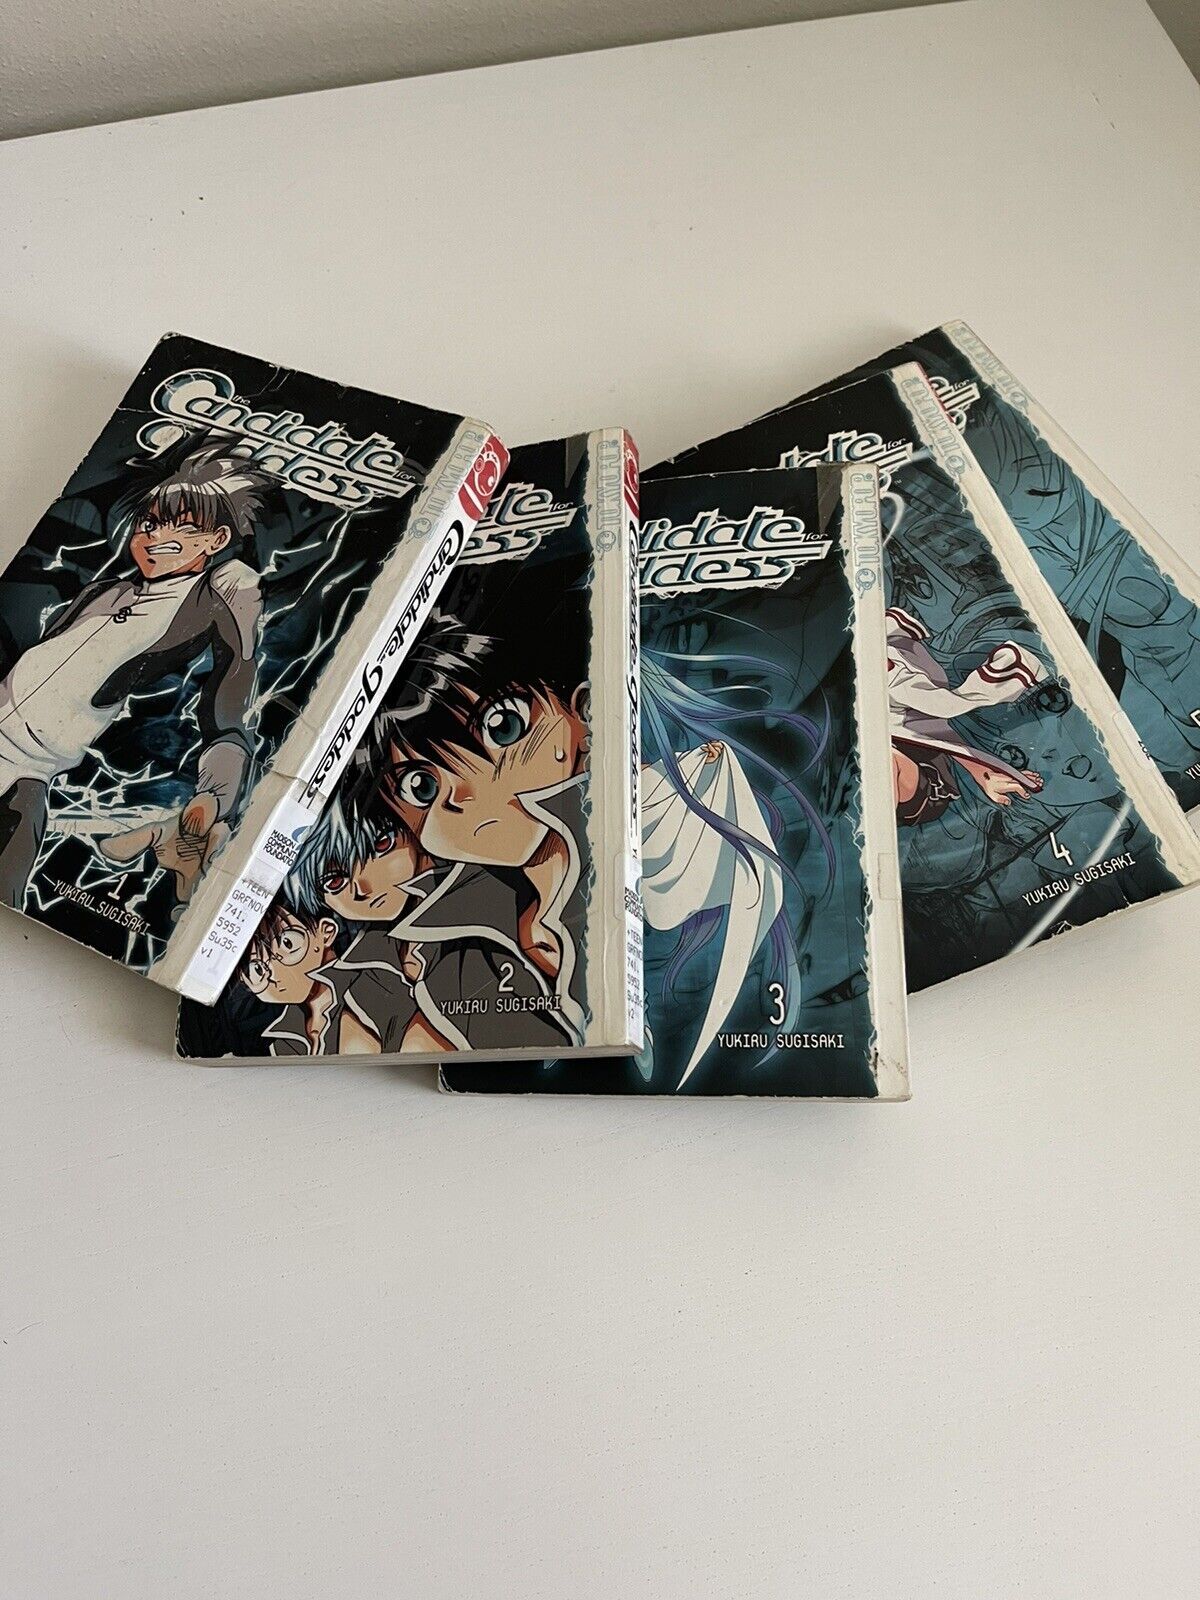 The Candidate for Goddess vol 1 - 5 ex library copies